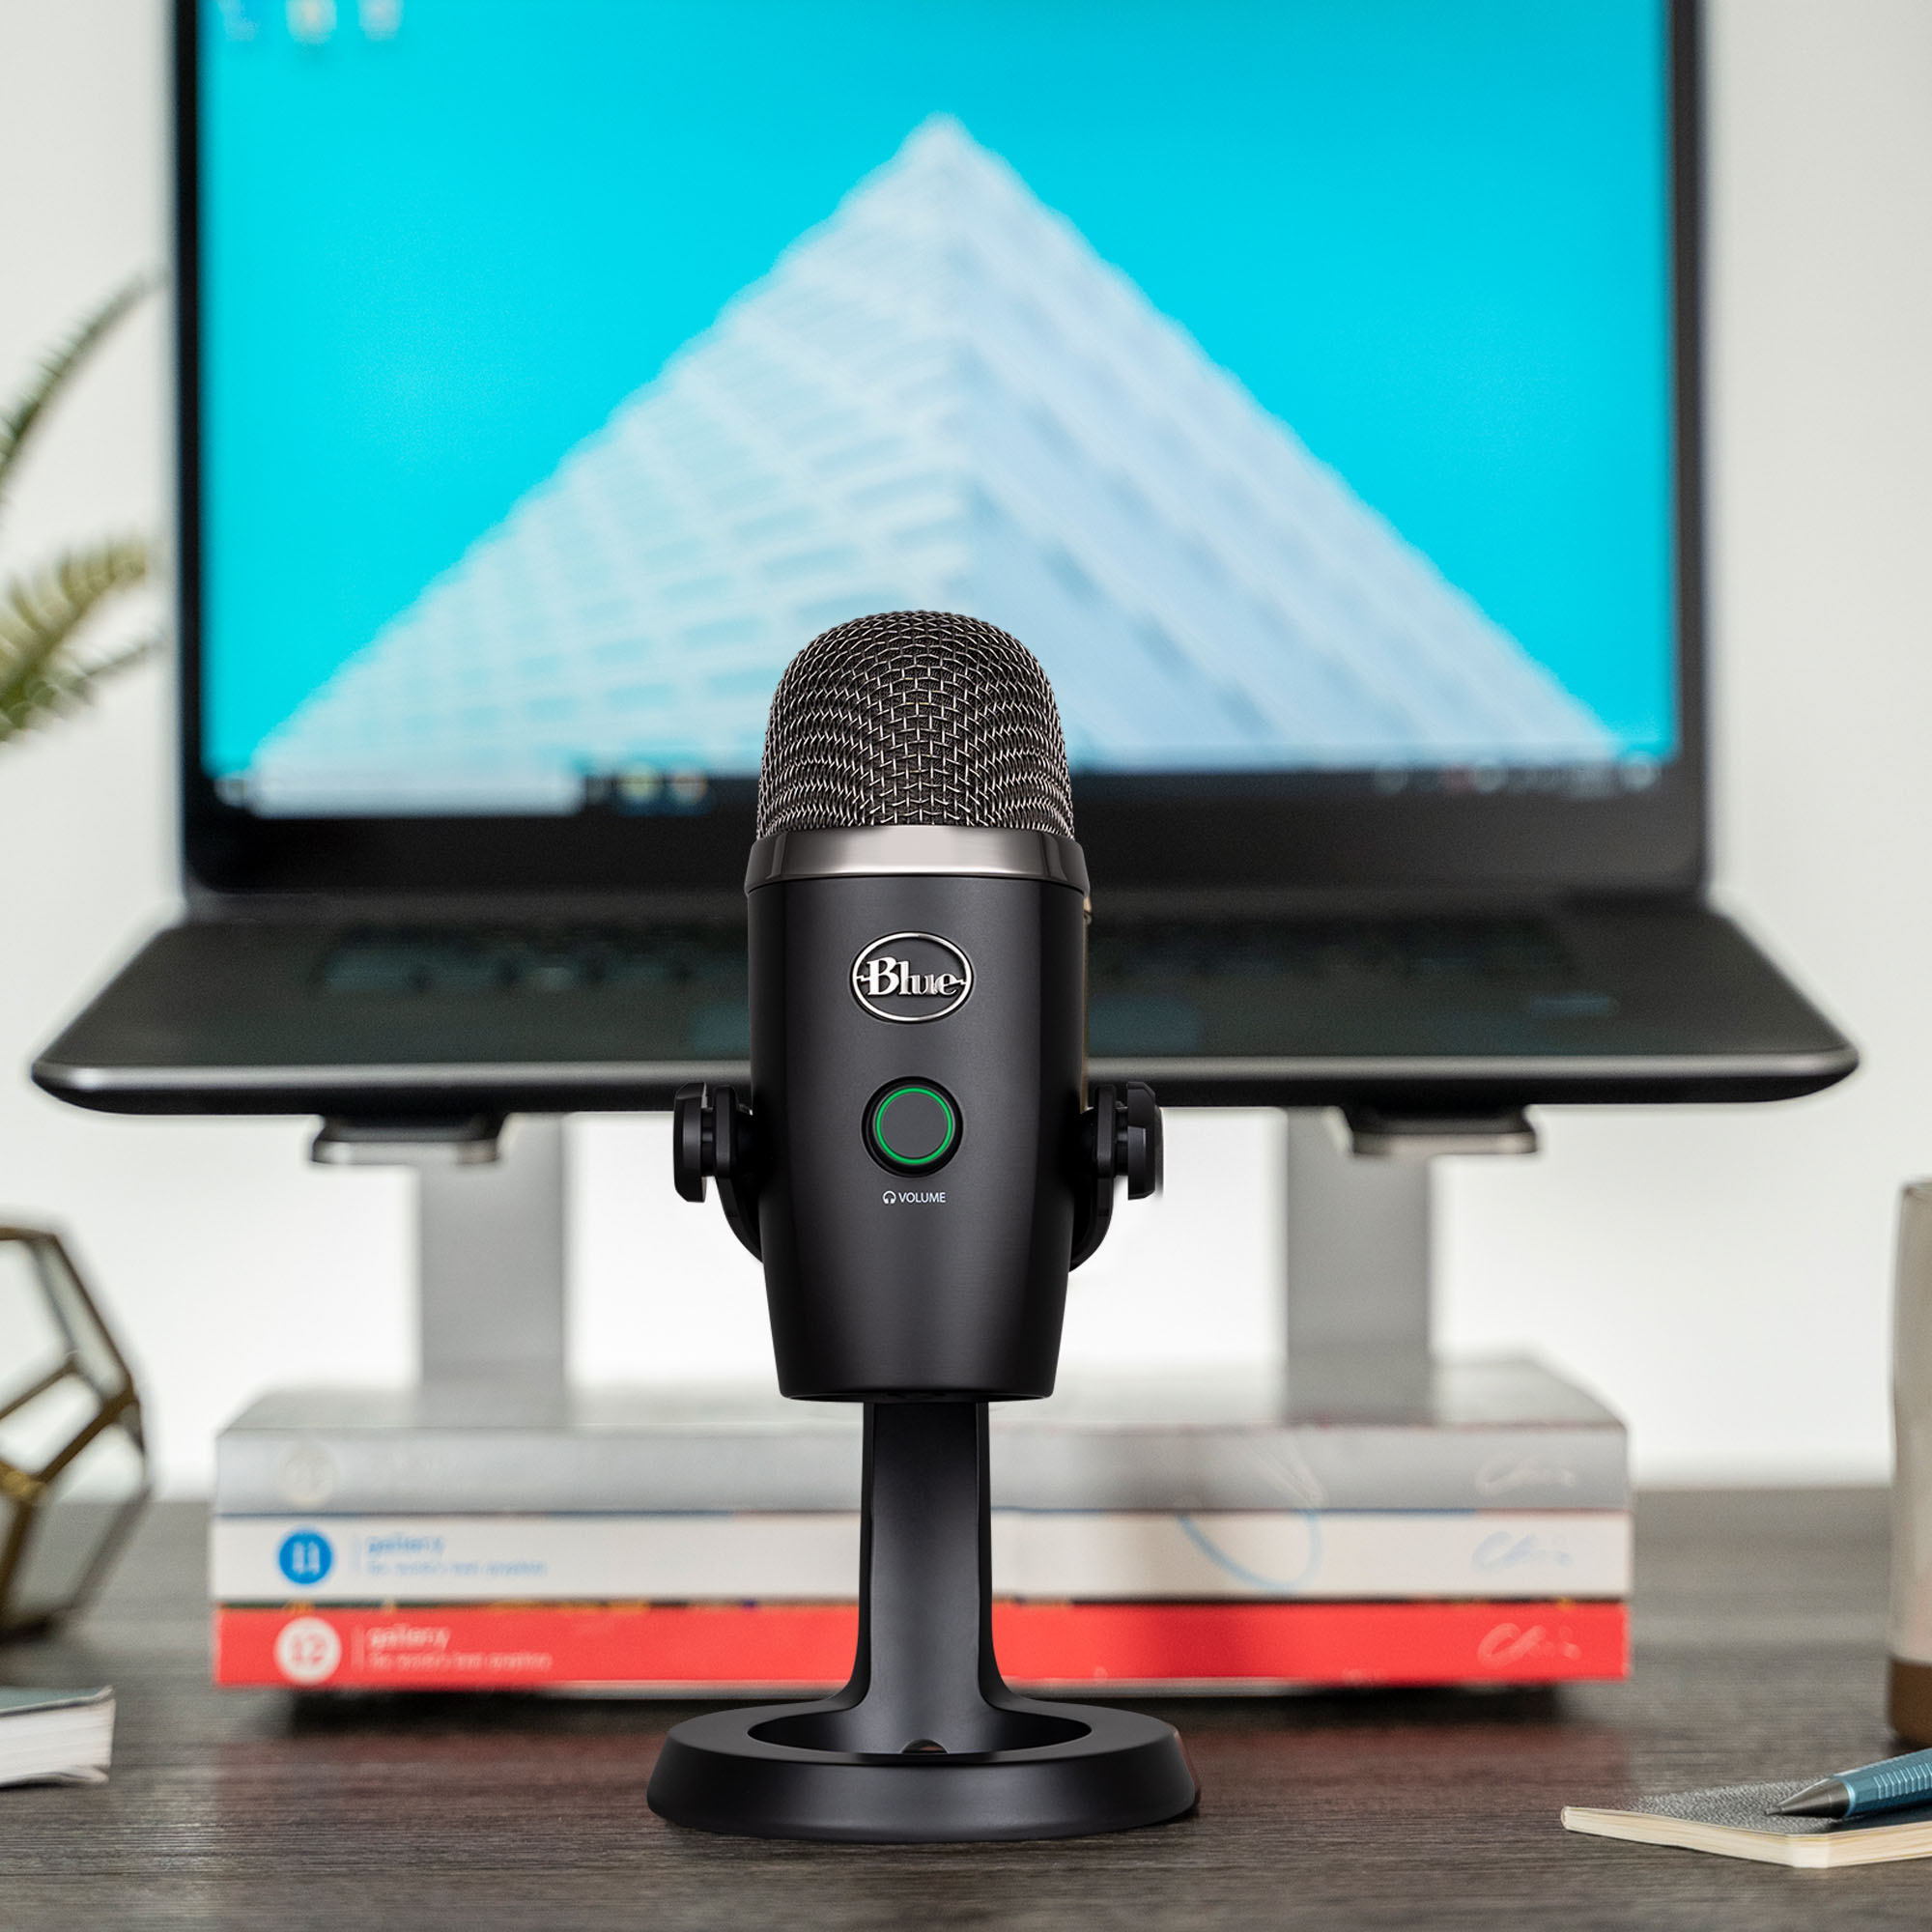 Angle View: Blue Yeti X Professional USB Condenser Microphone for PC, Mac, Gaming, Recording, Streaming, Podcasting on PC, Desktop Mic with High-Res Metering, LED Lighting, Blue VO!CE Effects - Black